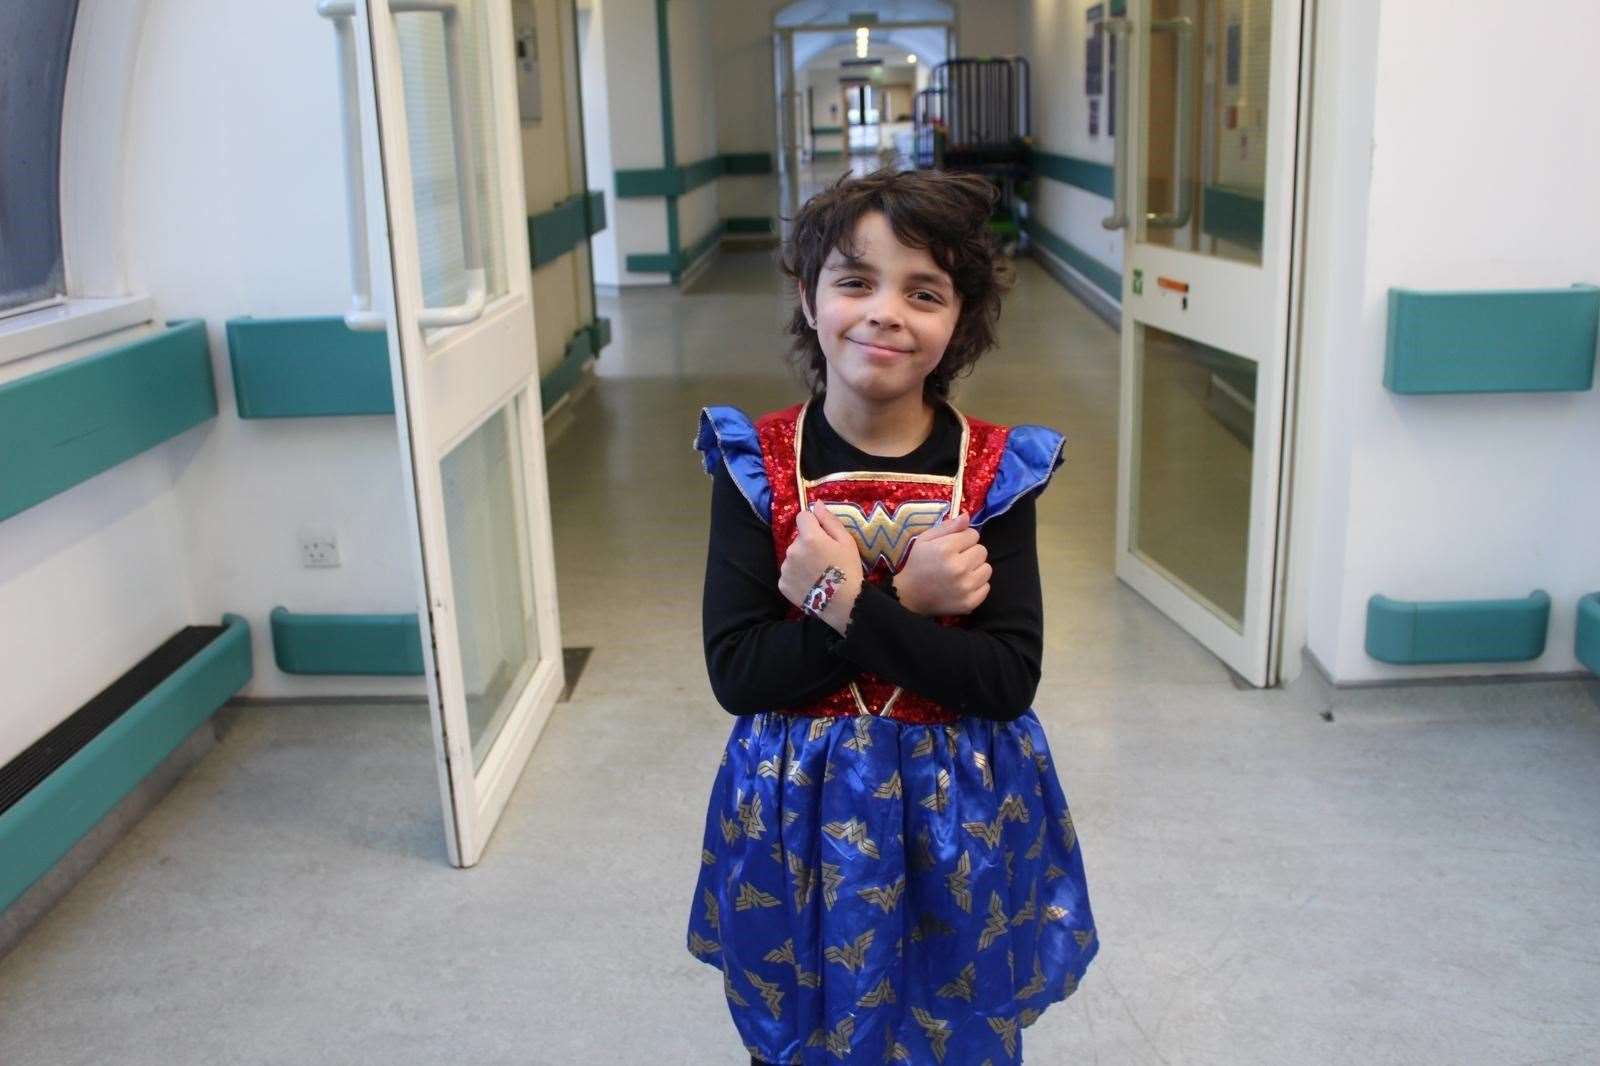 Arianna wore her Wonder Woman outfit during cancer treatment at Great Ormond Street Hospital to make her feel more confident (Family handout/GOSH Charity/PA)